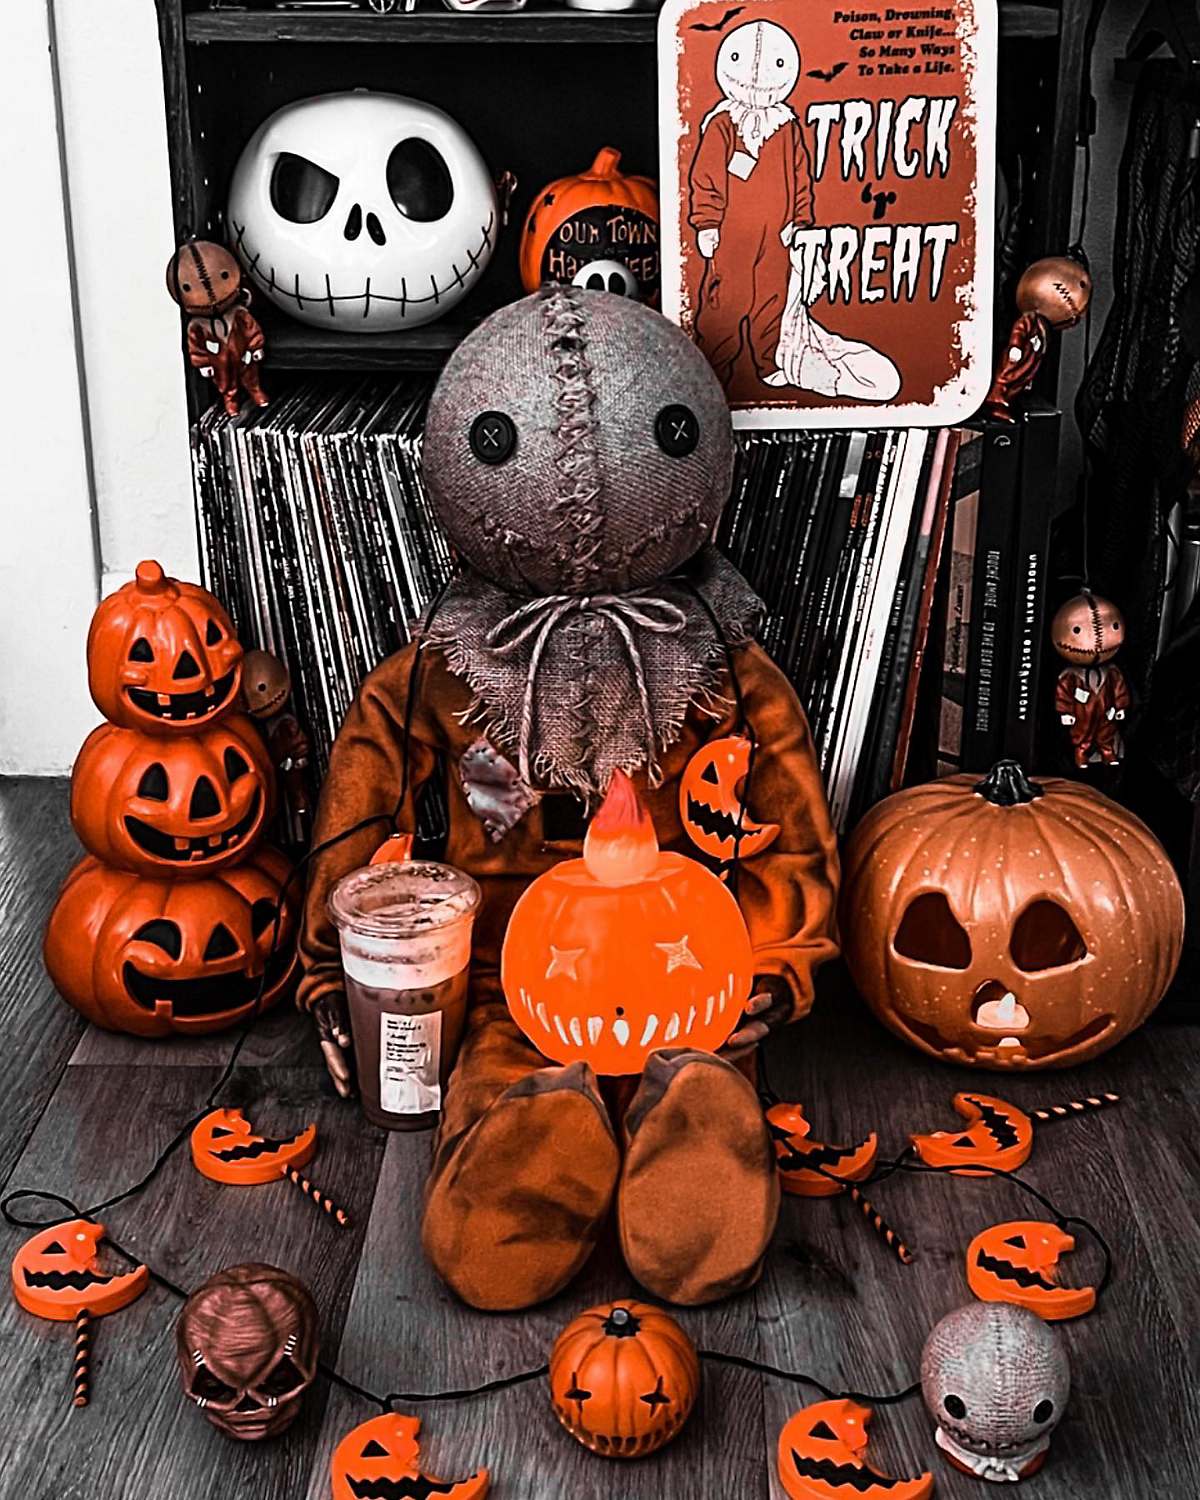 Sam from Trick 'r Treat figure surrounded by pumpkins and half-eaten lollipops with Jack Skellington toy on shelf behind him